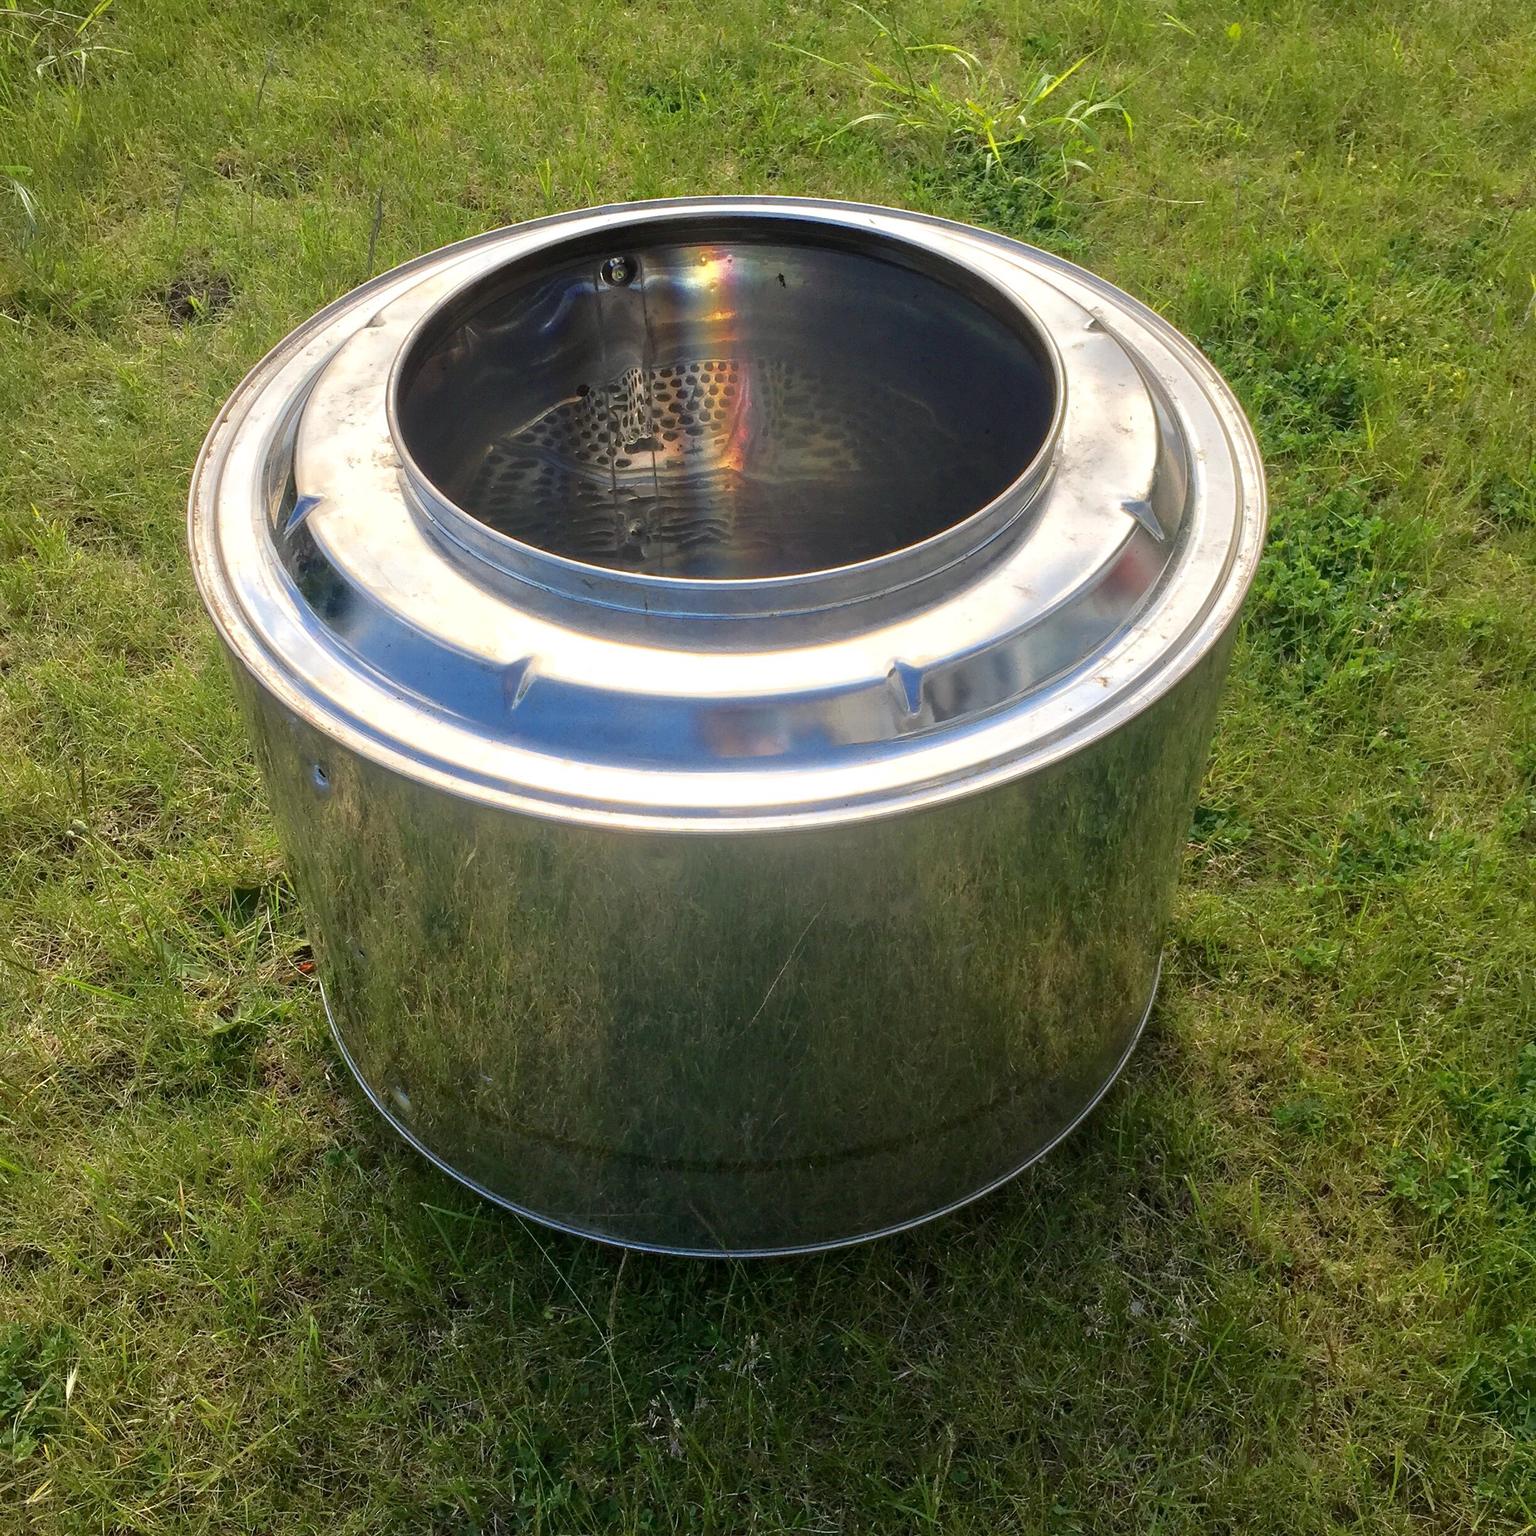 Fire Pit Large Tumble Dryer Drum In, Dryer Drum Fire Pit